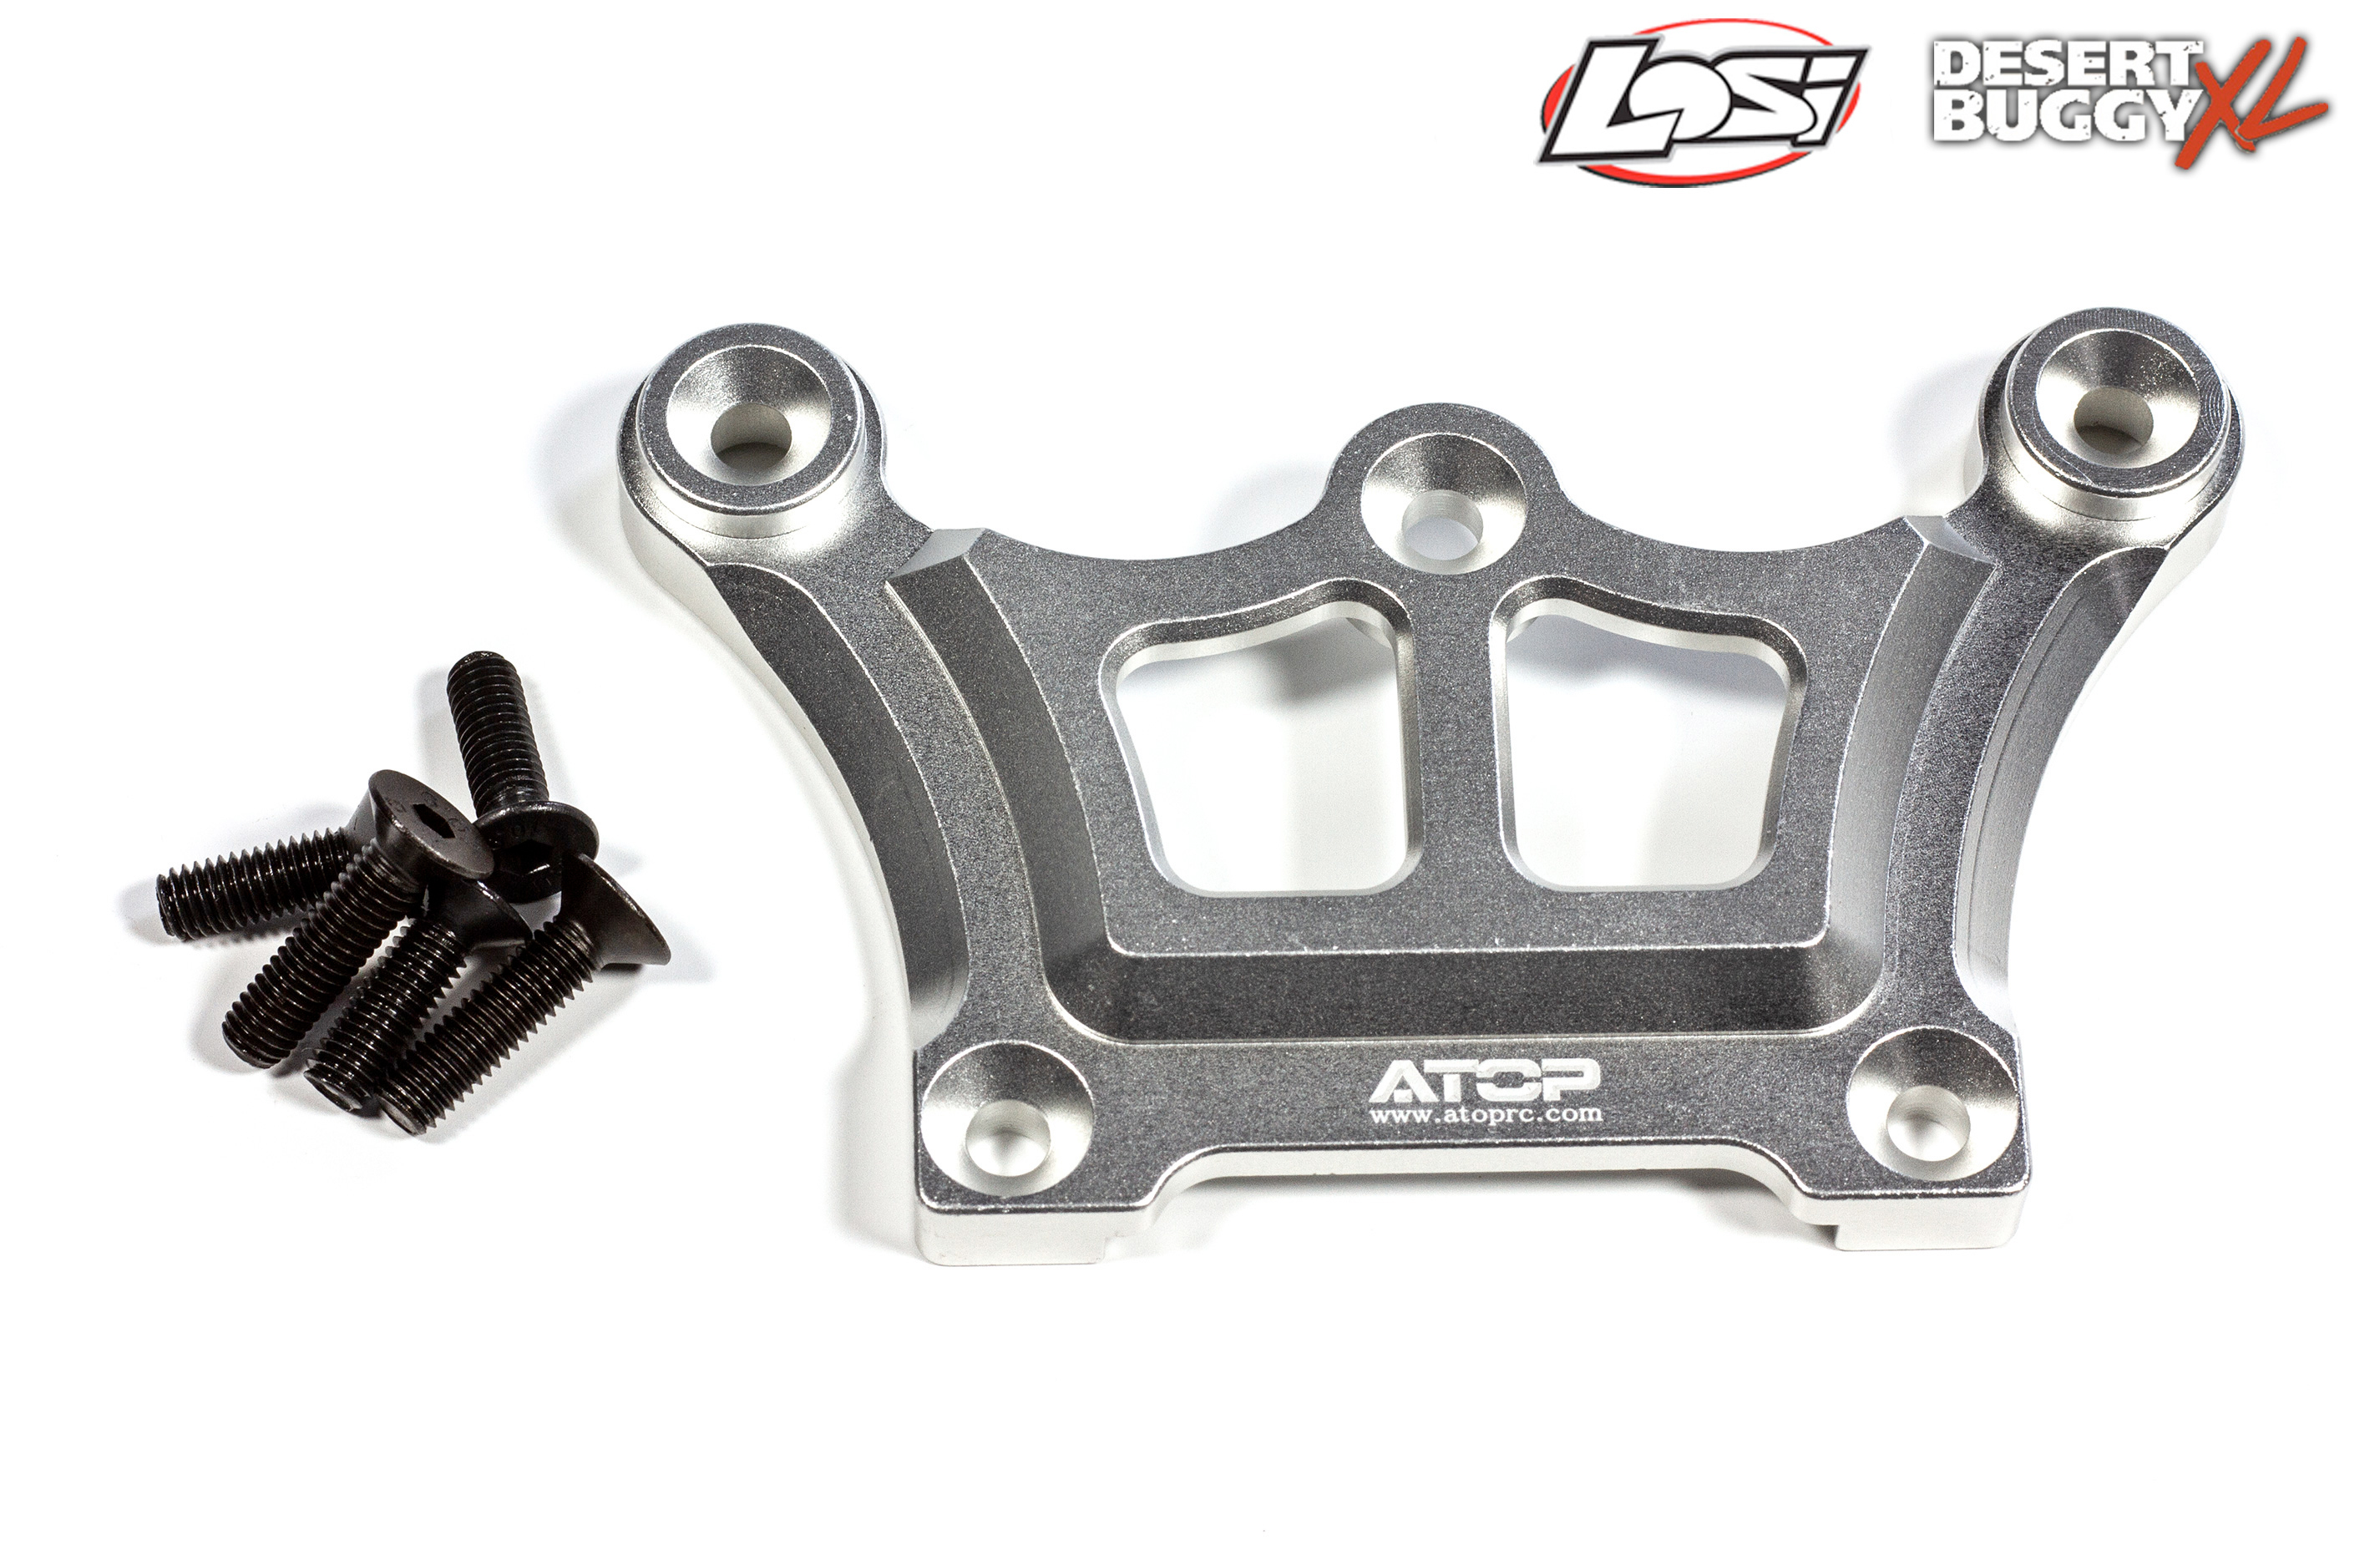 AT-DBXL008 ATOP aluminum front top chassis brace for Losi DBXL/MTXL